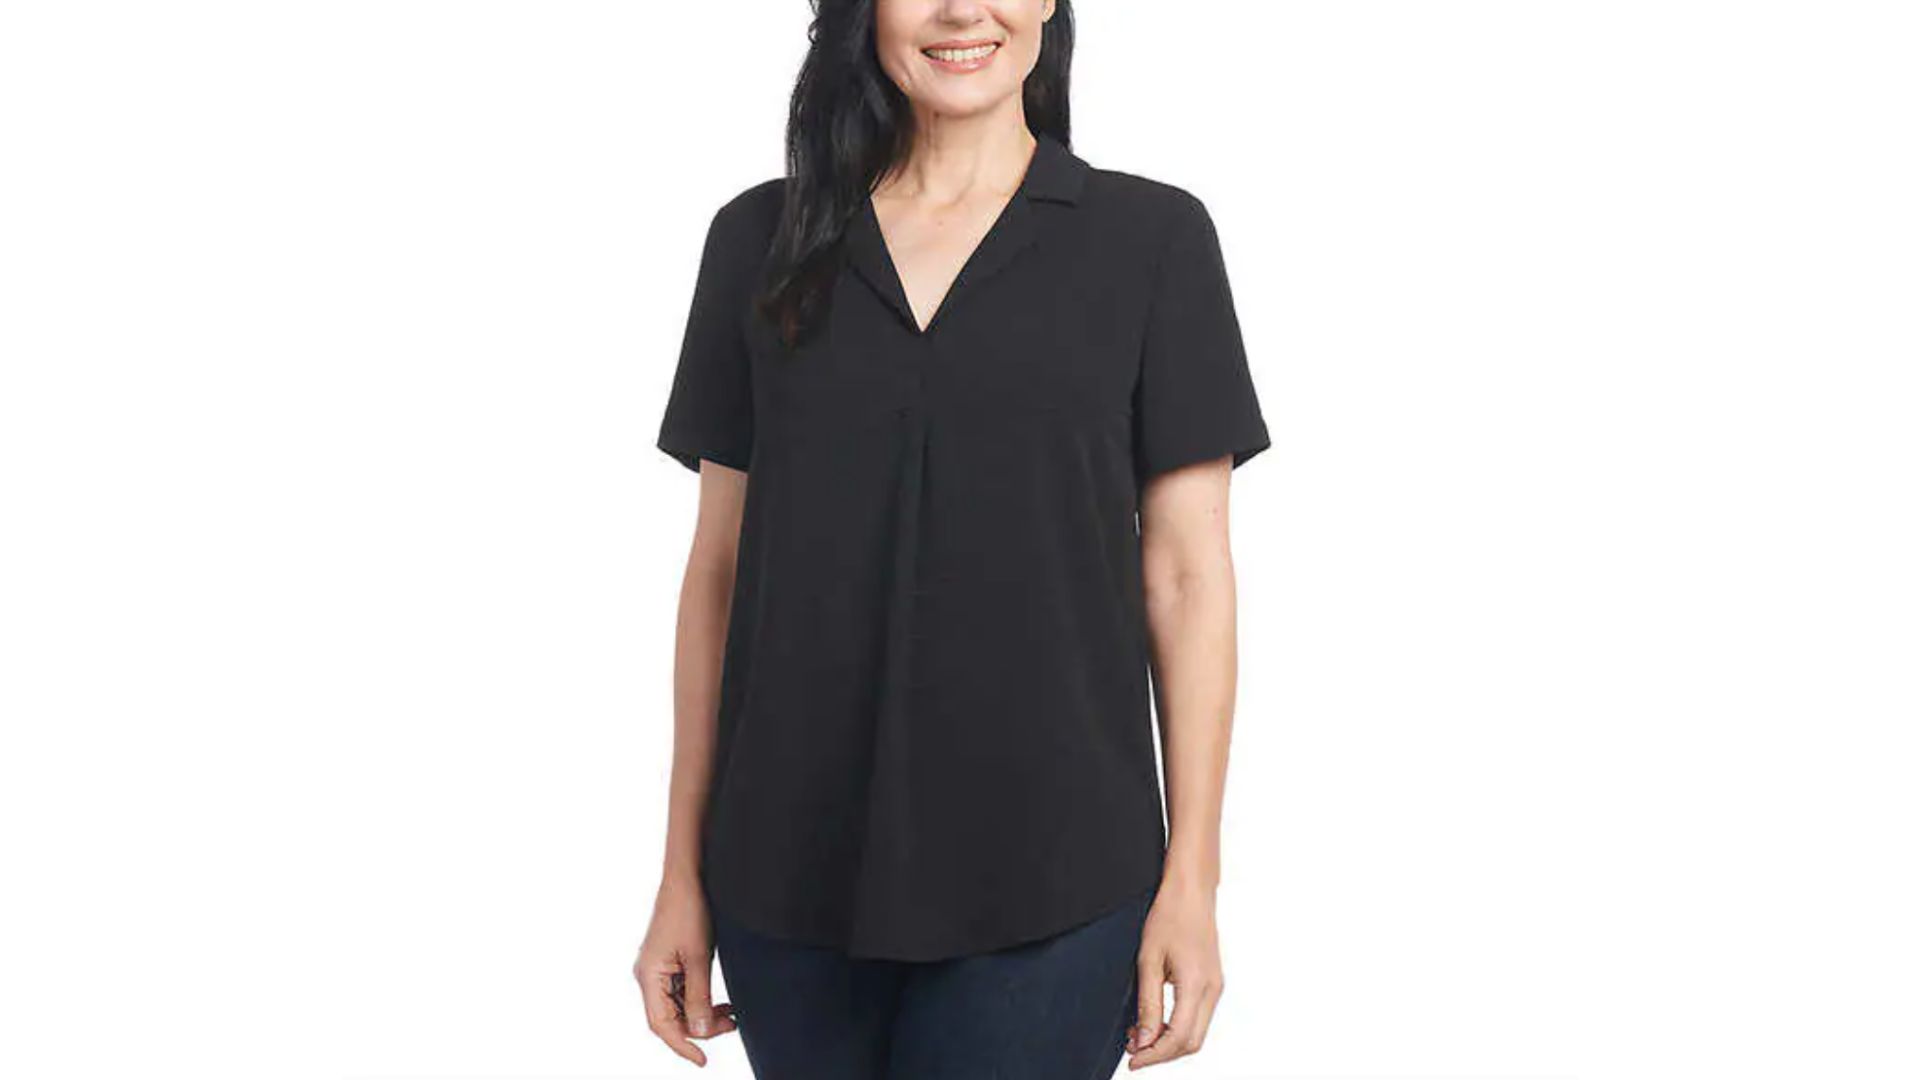 <ul> <li><strong>Price:</strong> <a href="https://www.costco.com/hilary-radley-ladies'-blouse.product.4000196457.html" rel="noreferrer noopener">$12.99</a></li> </ul> <p>Whether you need to dress up or dress down a look, add a few of these Hilary Radley ladies' blouses to your Costco shopping cart. Members receive $3 off the original price of $15.99.</p> <p>Choose from colors like black, pink, white and blue and pick your size from several available women's size options. Each blouse features a rounded hem, tailor collar and a relaxed fit.</p>